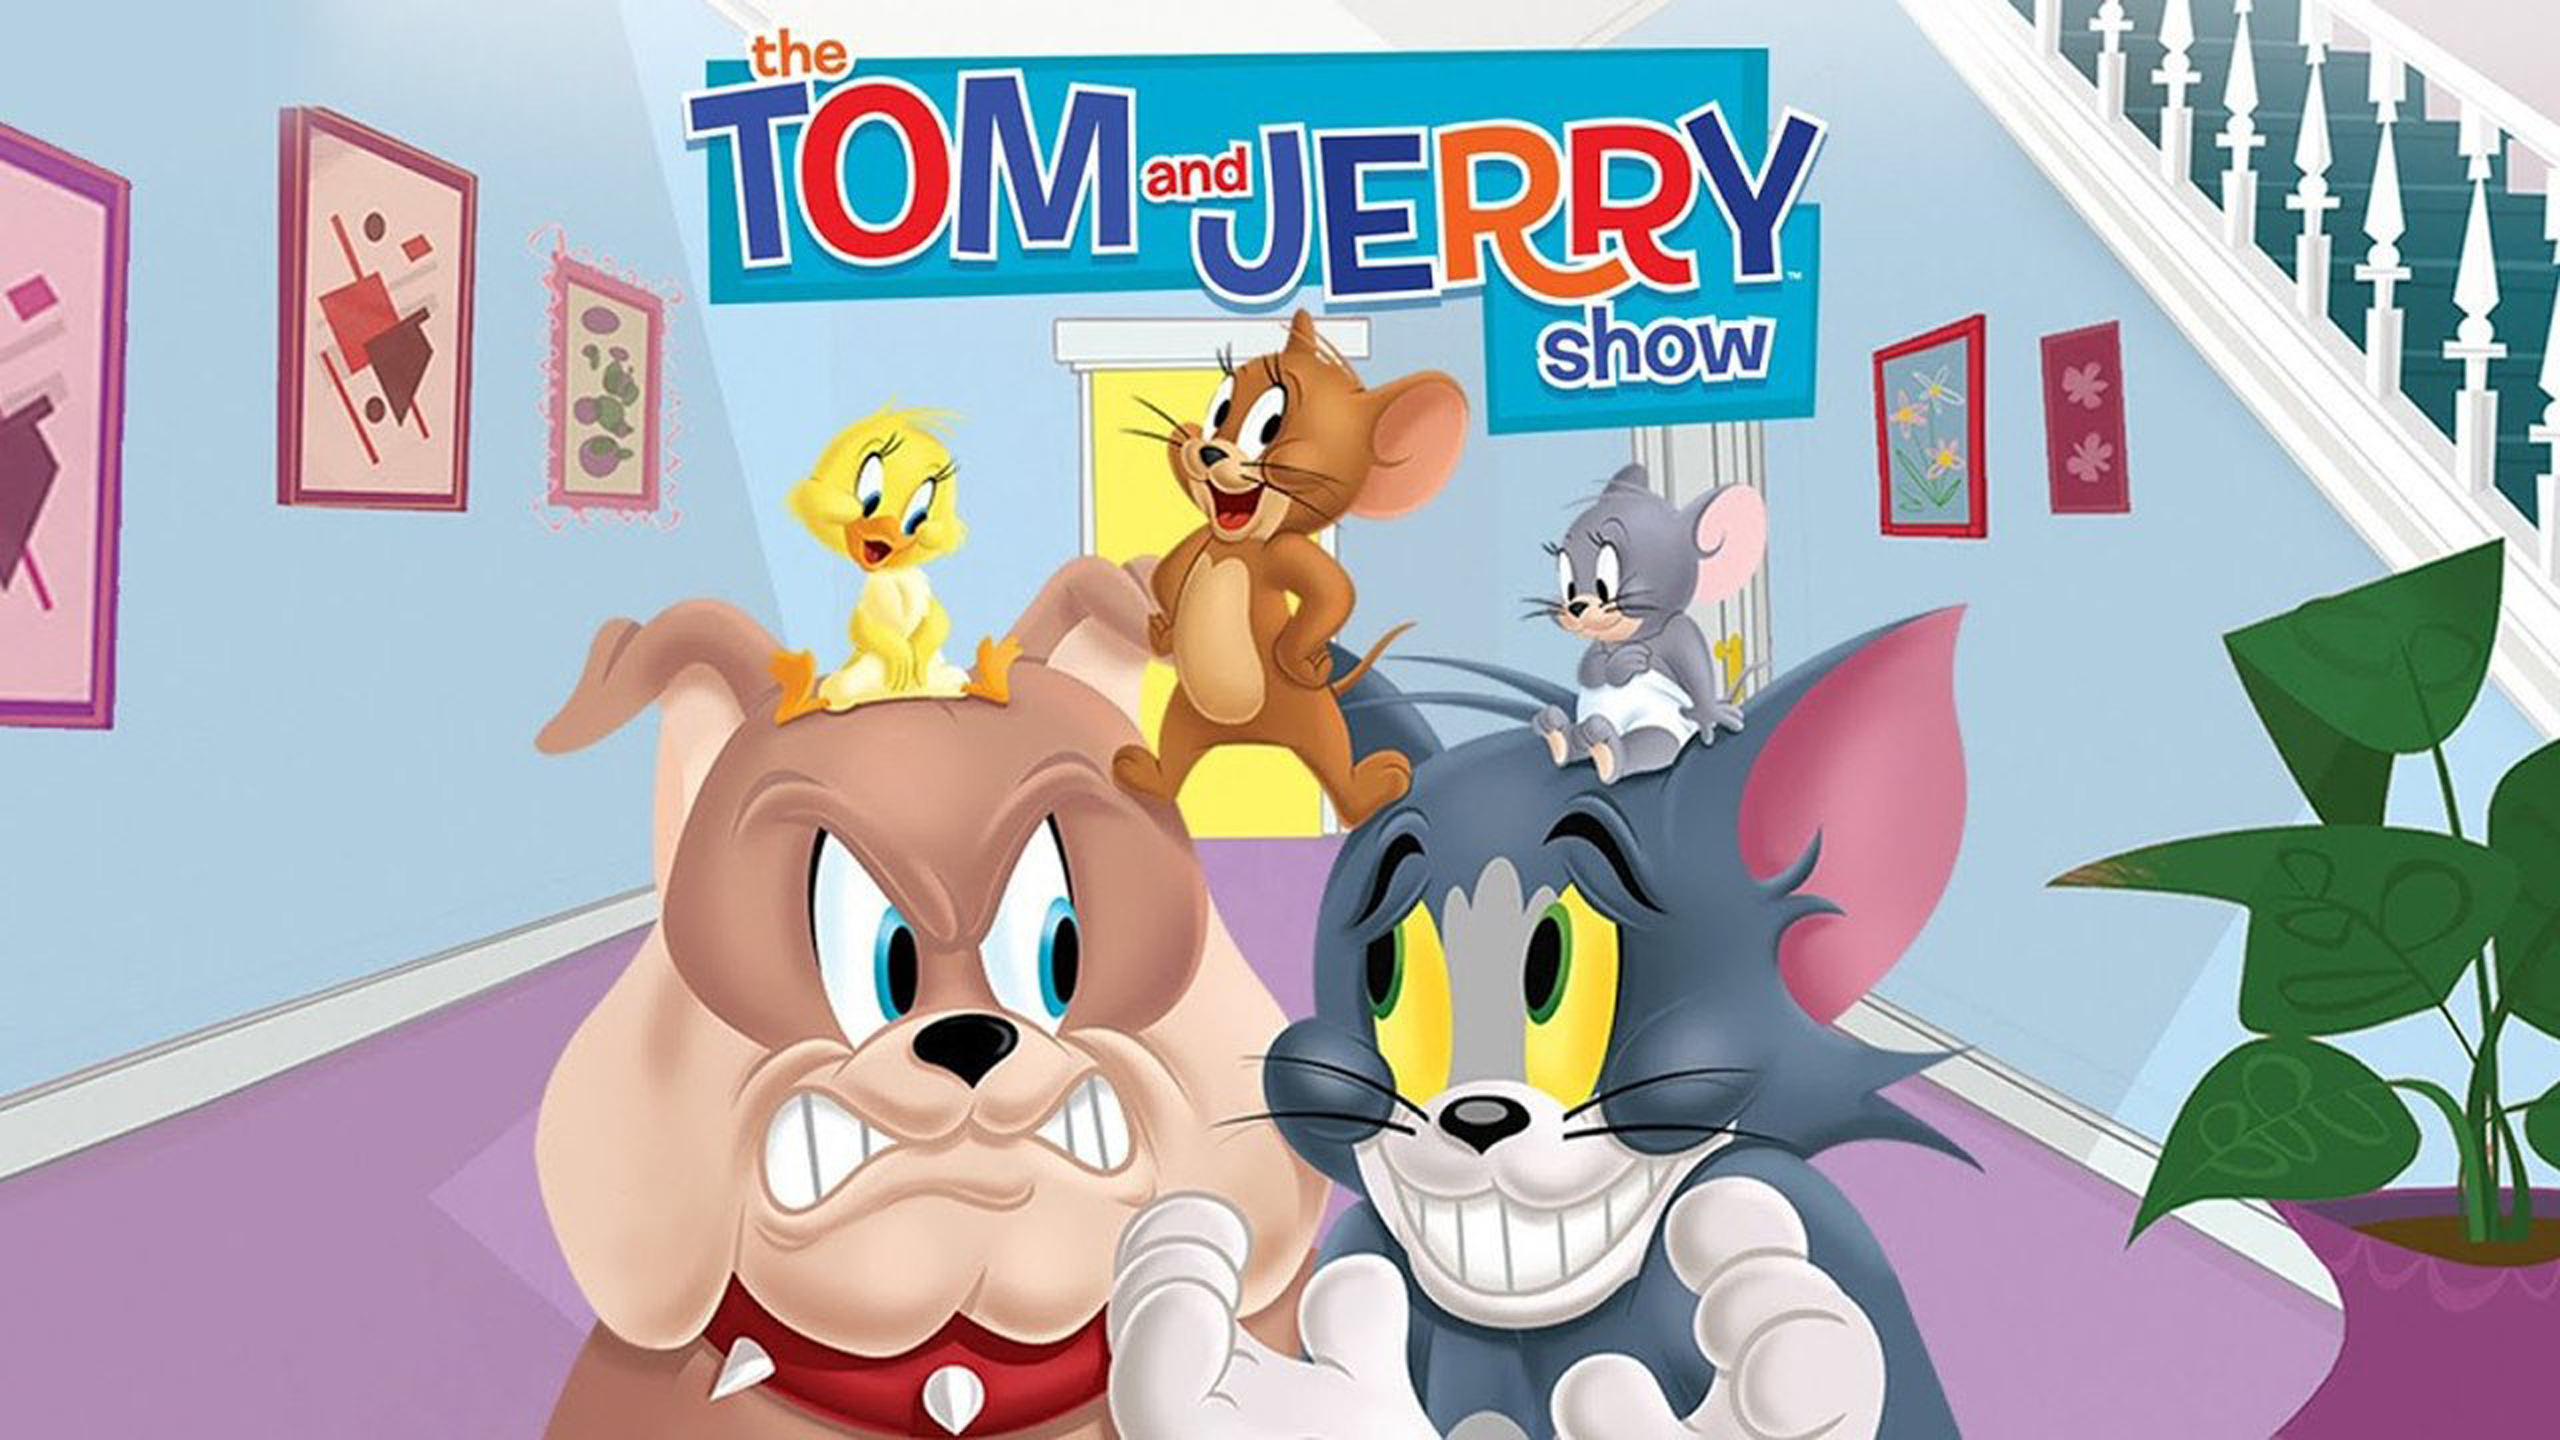 Tom y jerry show wallpapers for mobile and tablet x